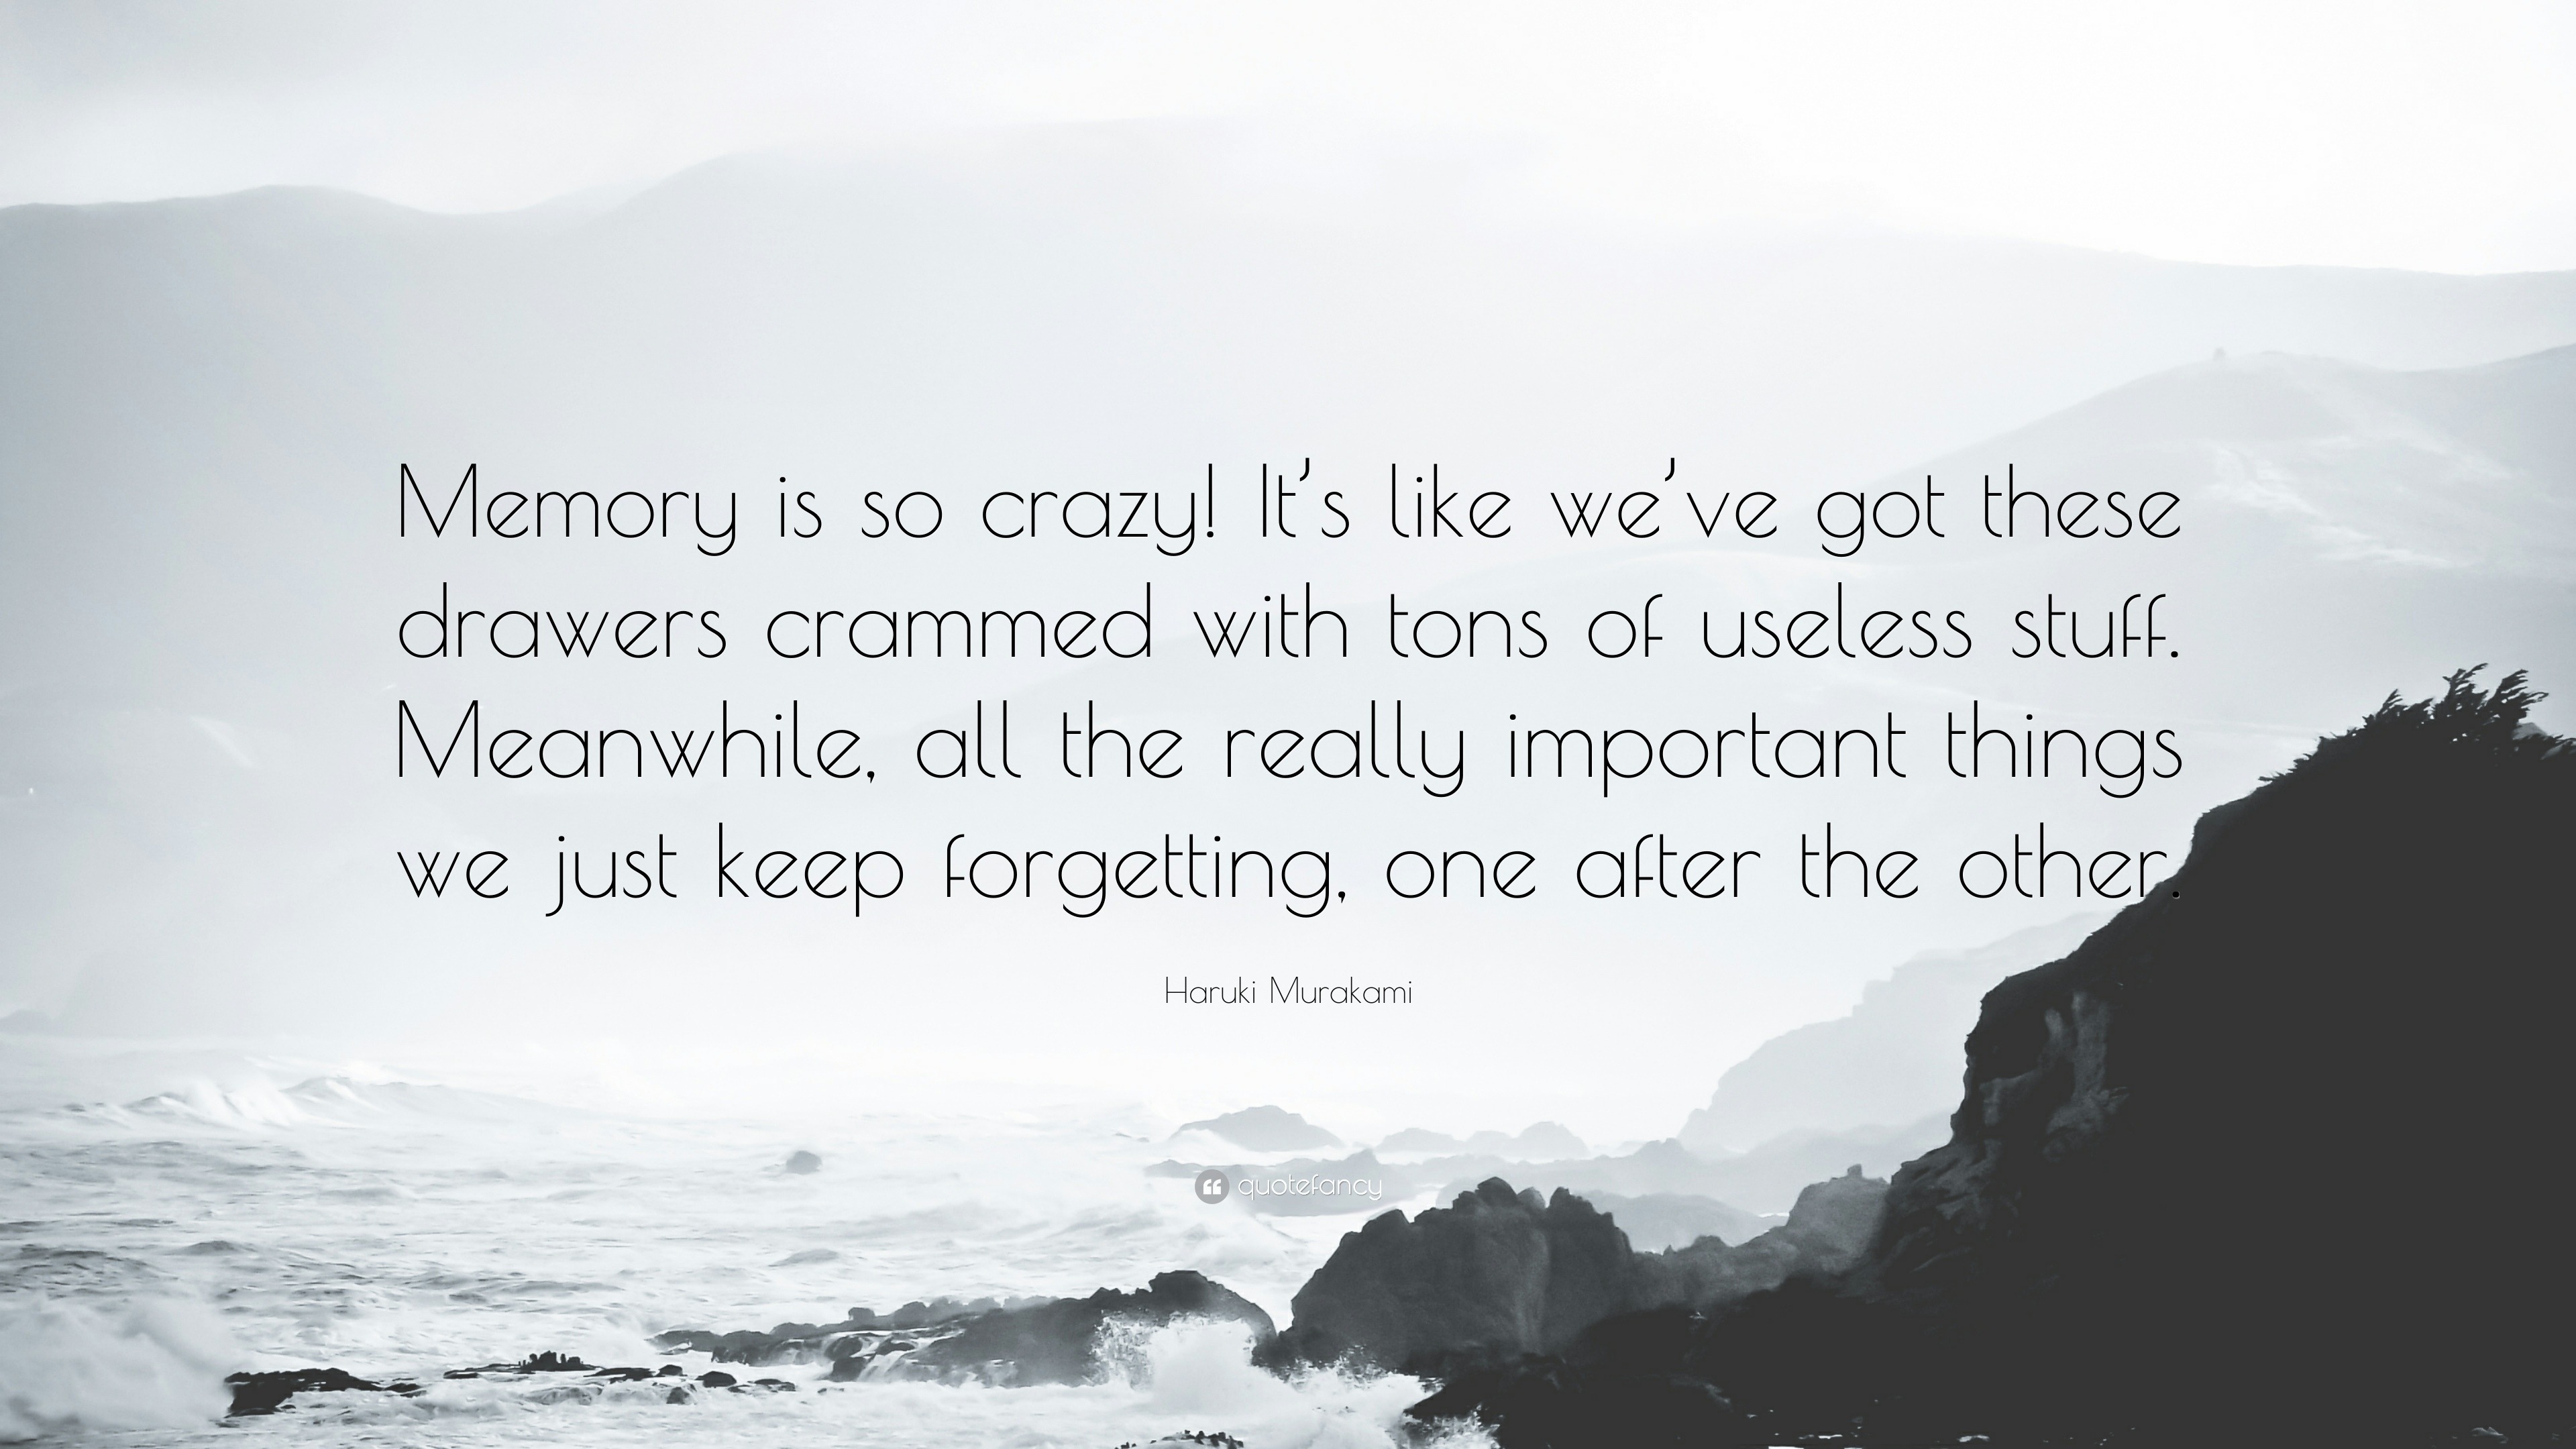 Haruki Murakami Quote: “Memory is so crazy! It's like we've got these  drawers crammed with tons of useless stuff. Meanwhile, all the really  impo...”